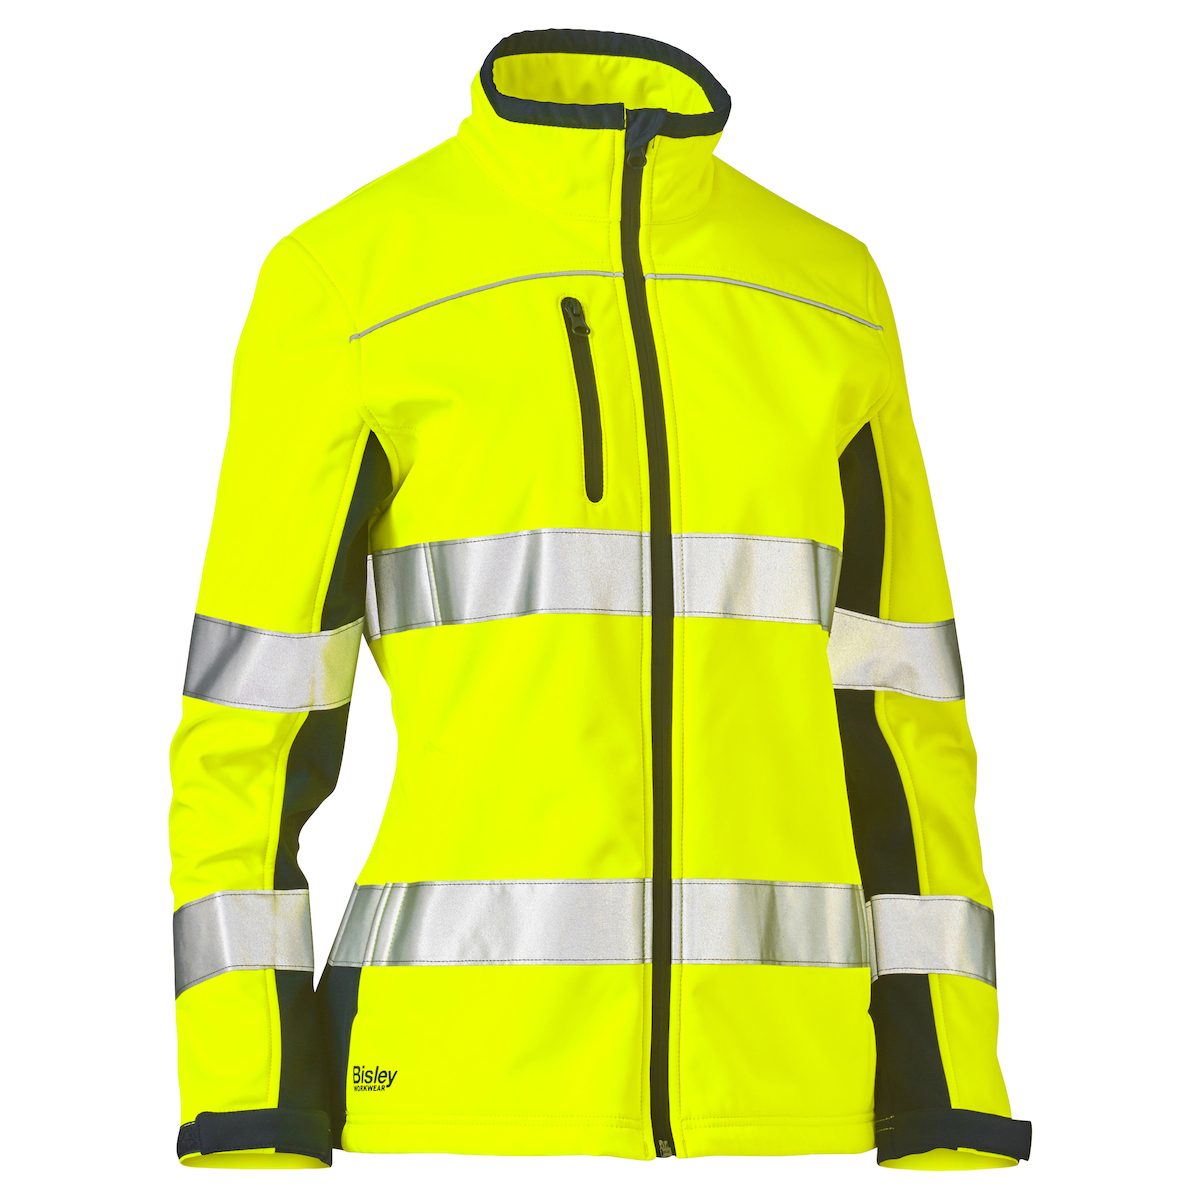 BISLEY CLASS 3 WOMEN'S SOFT SHELL JACKET - New Products